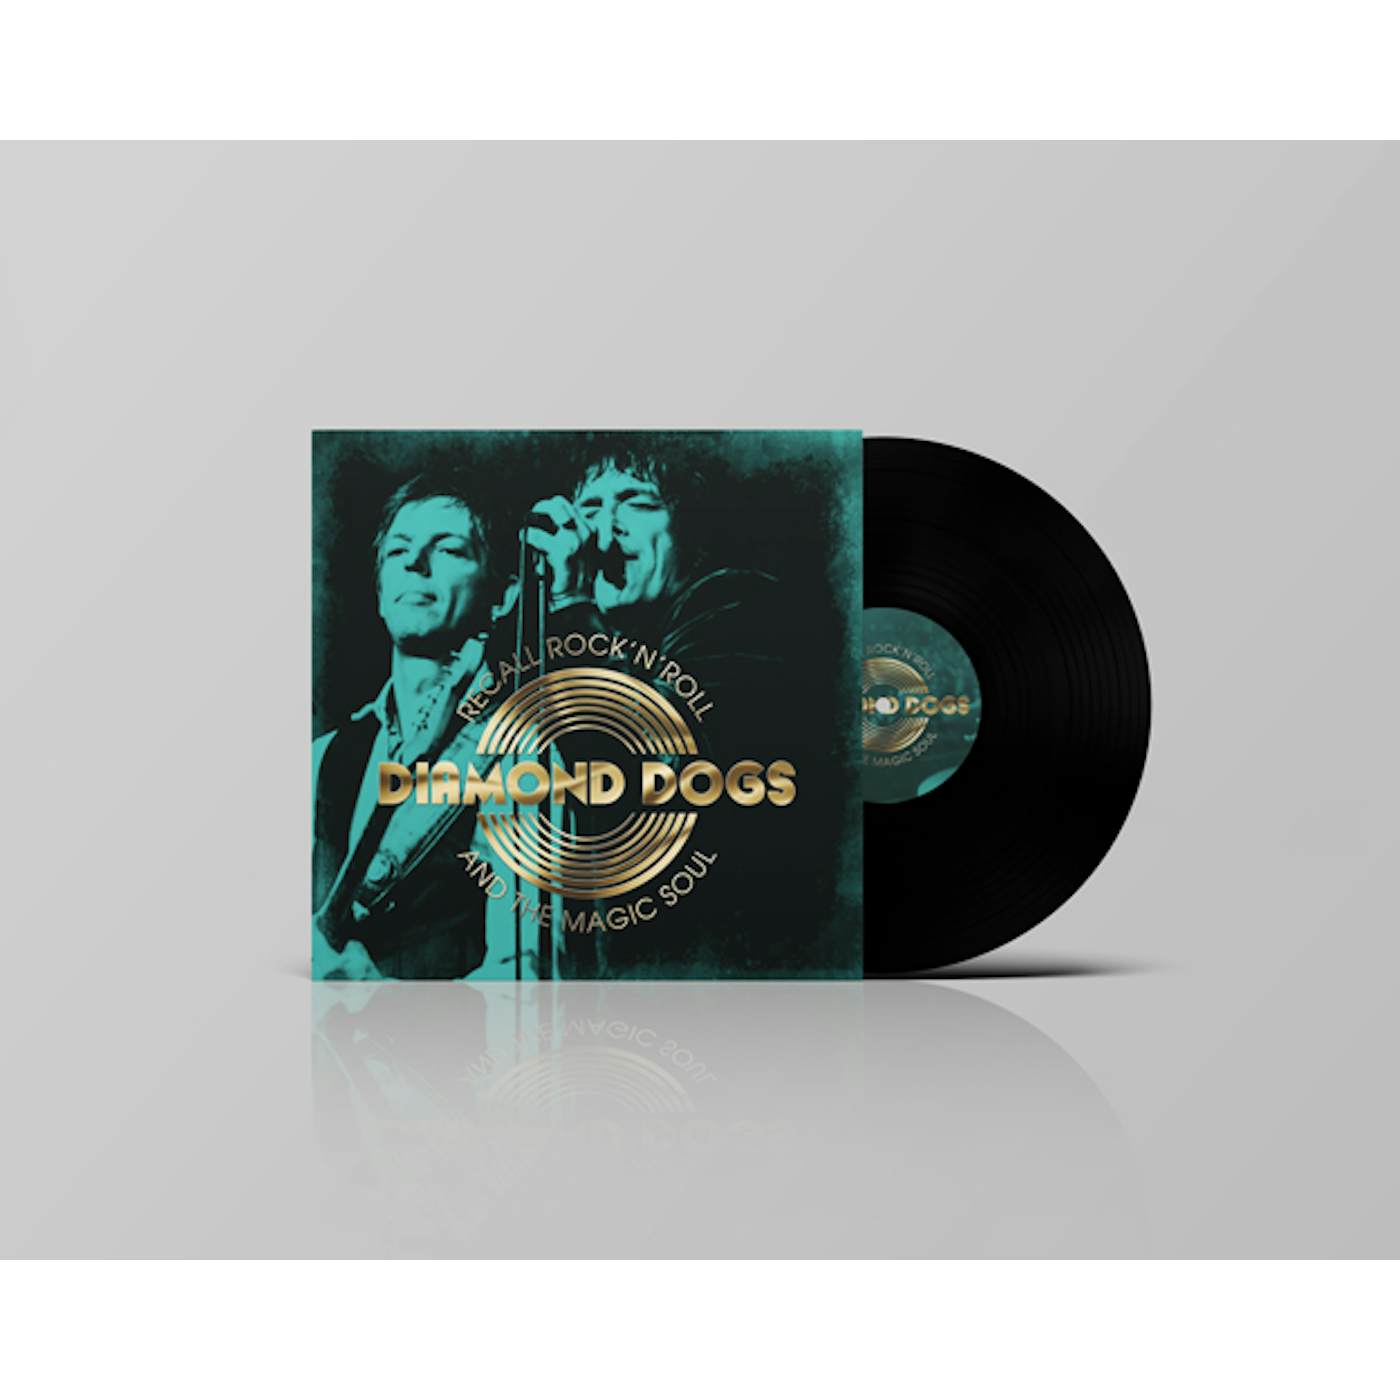 Diamond Dogs RECALL ROCK N ROLL AND THE MAGIC SOUL Vinyl Record